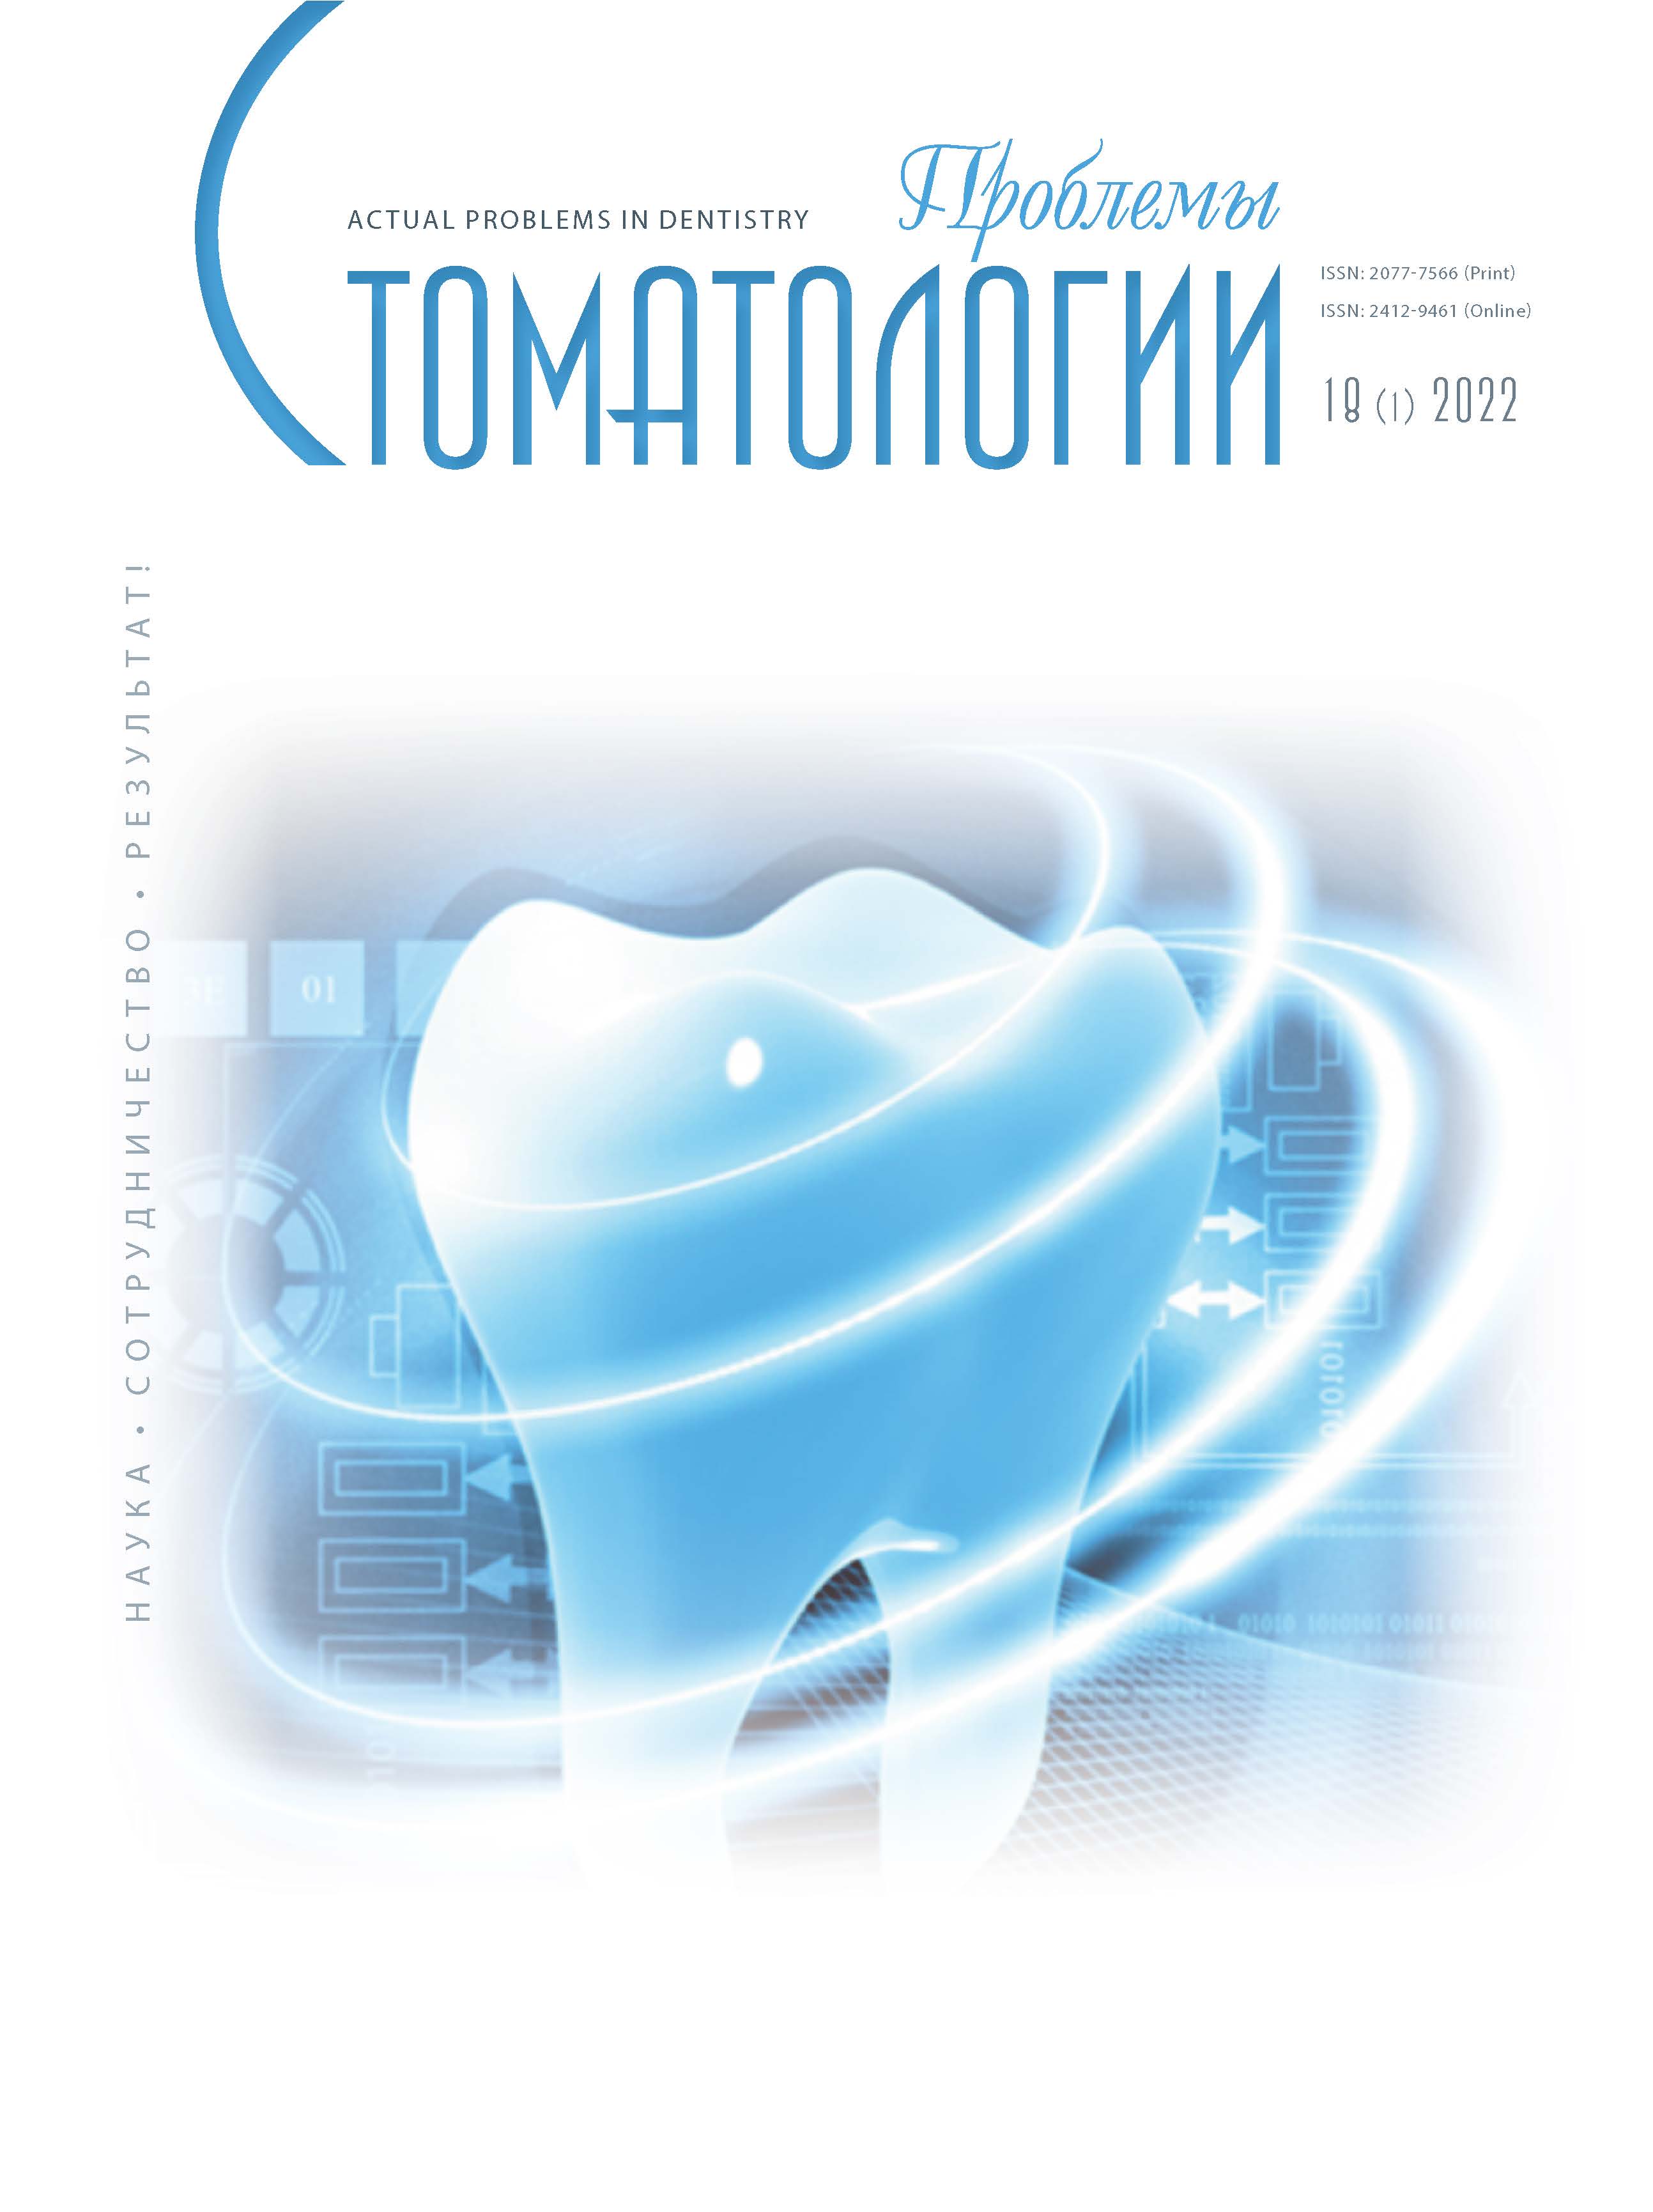                         FINITE ELEMENT ANALYSIS OF THE HUMANA DENTAL IMPLANTS WITH AN INNOVATIVE SURFACE AND THREAD DESIGN TO REVEAL THE STRESS DISTRIBUTION IN THE IMPLANT, BONE TISSUE AND AT THE ABUTMENT-IMPLANT-BONE INTERFACE
            